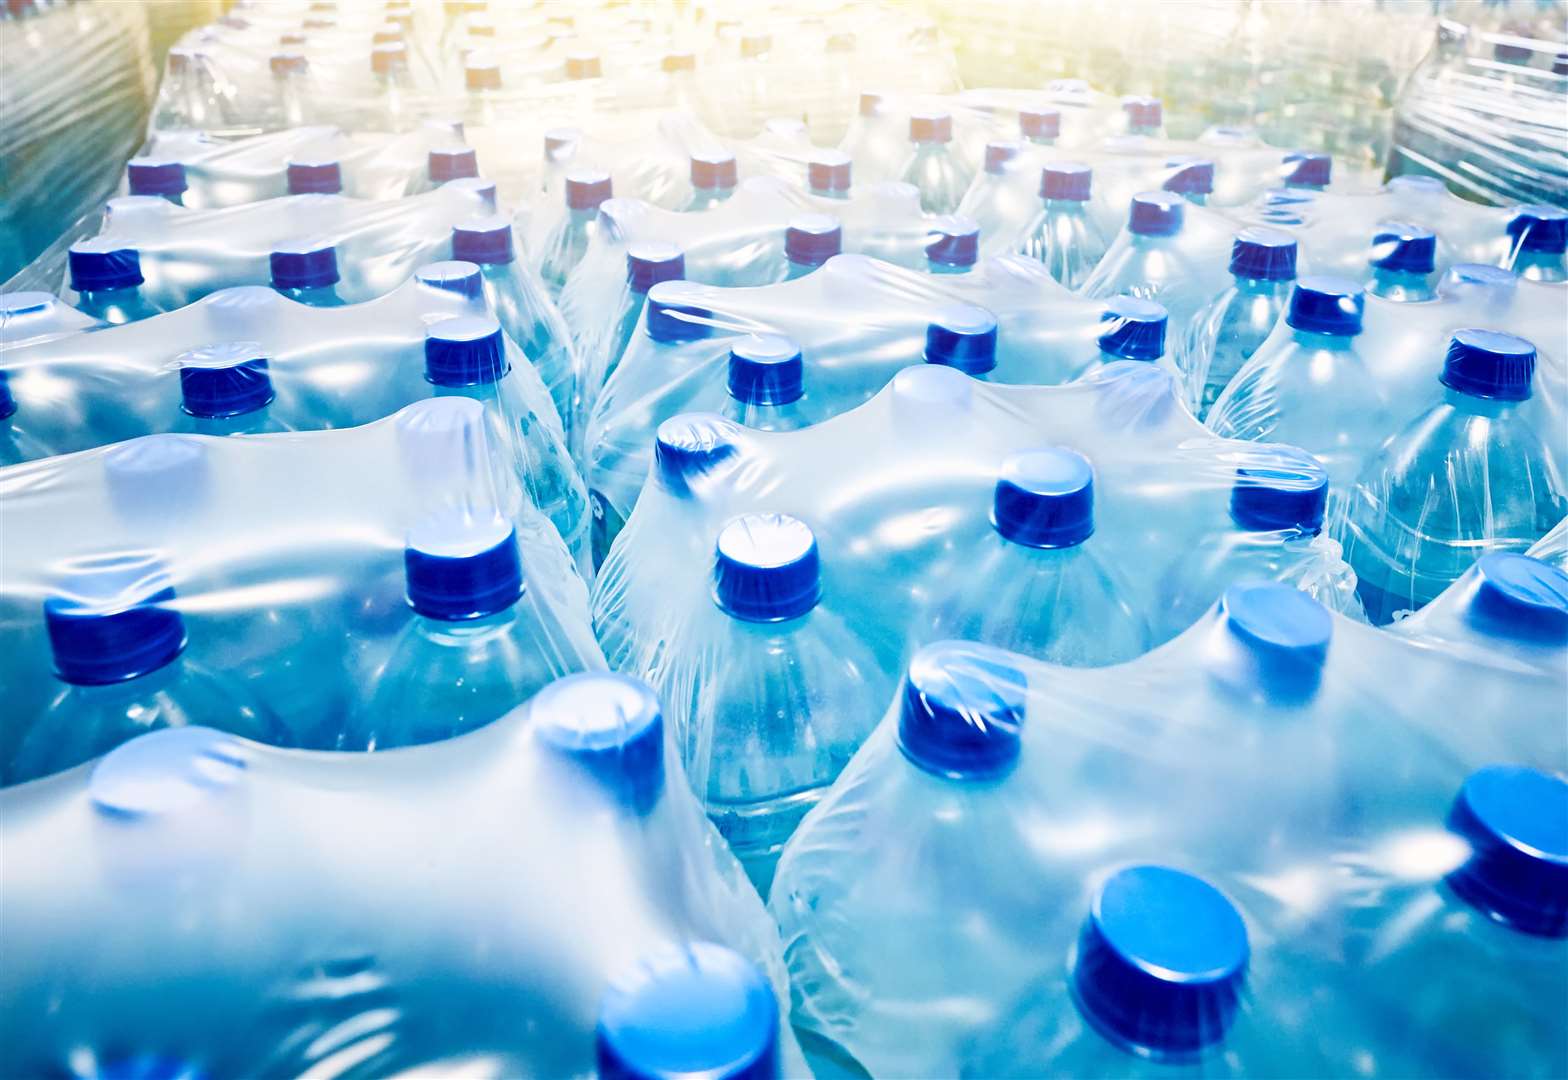 Bottled water stations have been set up for residents affected in Maidstone. Photo: Stock